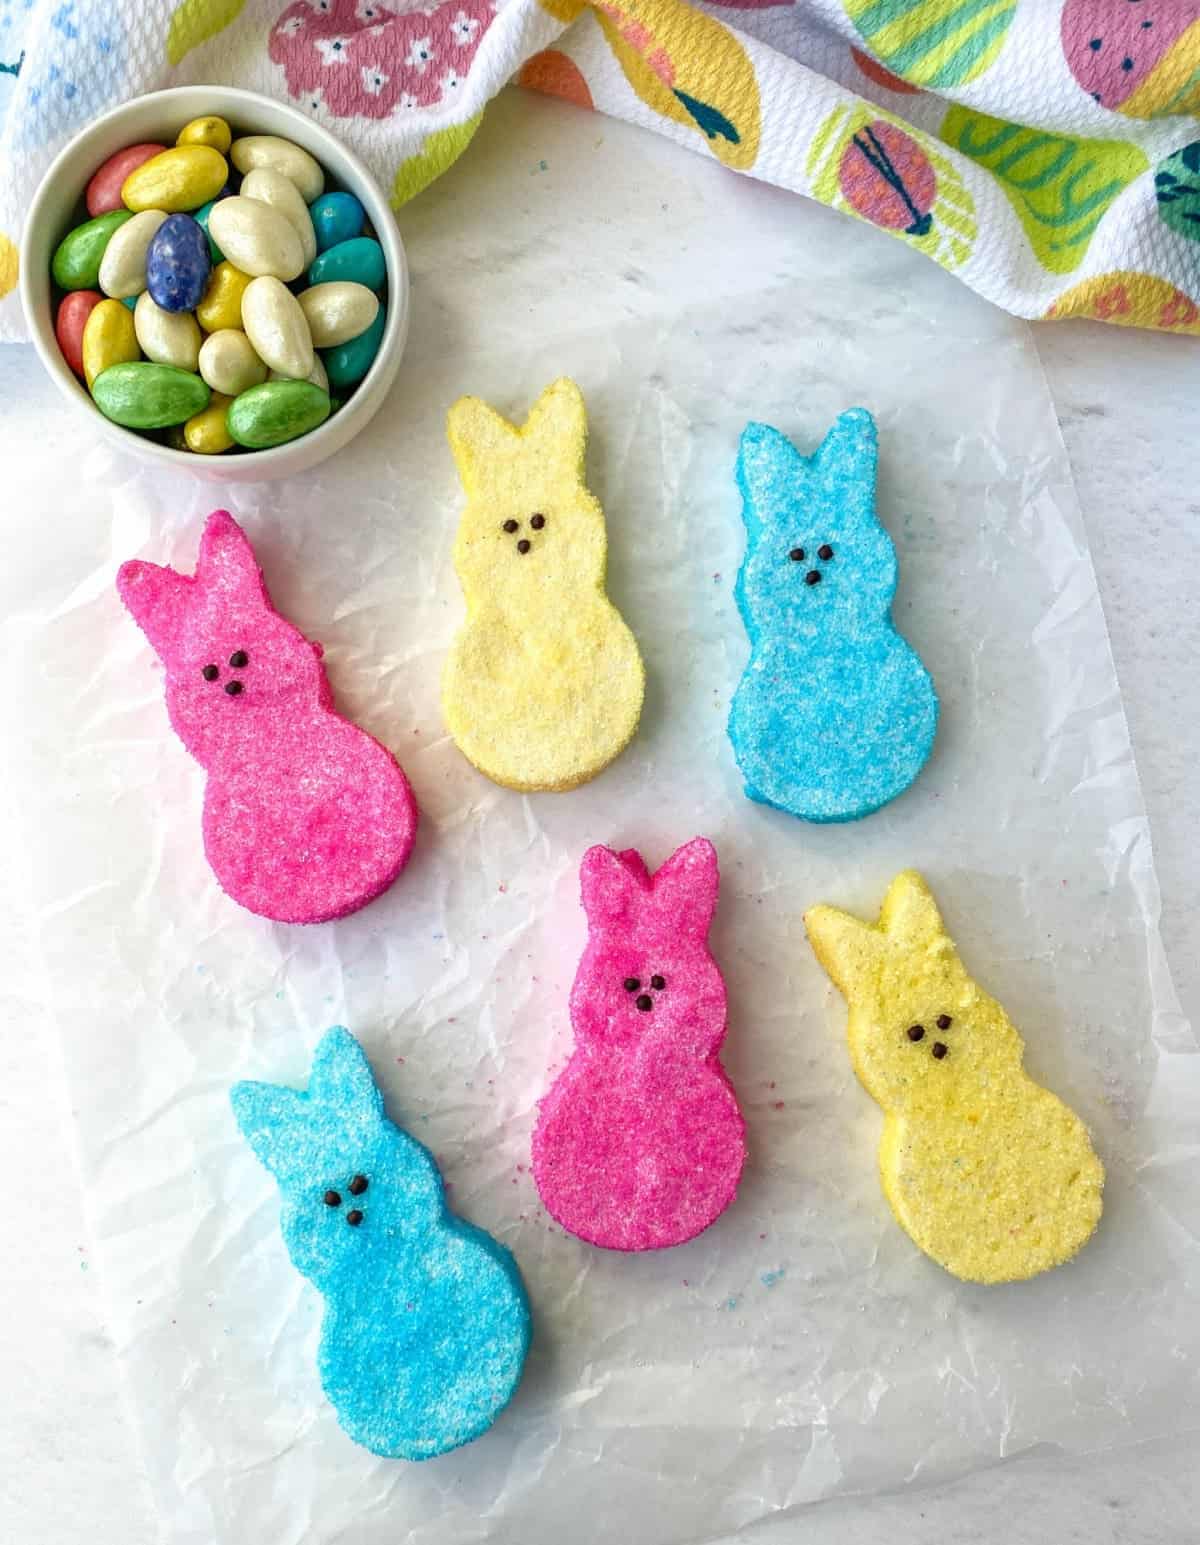 Bunny-shaped Homemade Peeps on parchment with a bowl of jellybeans nearby.